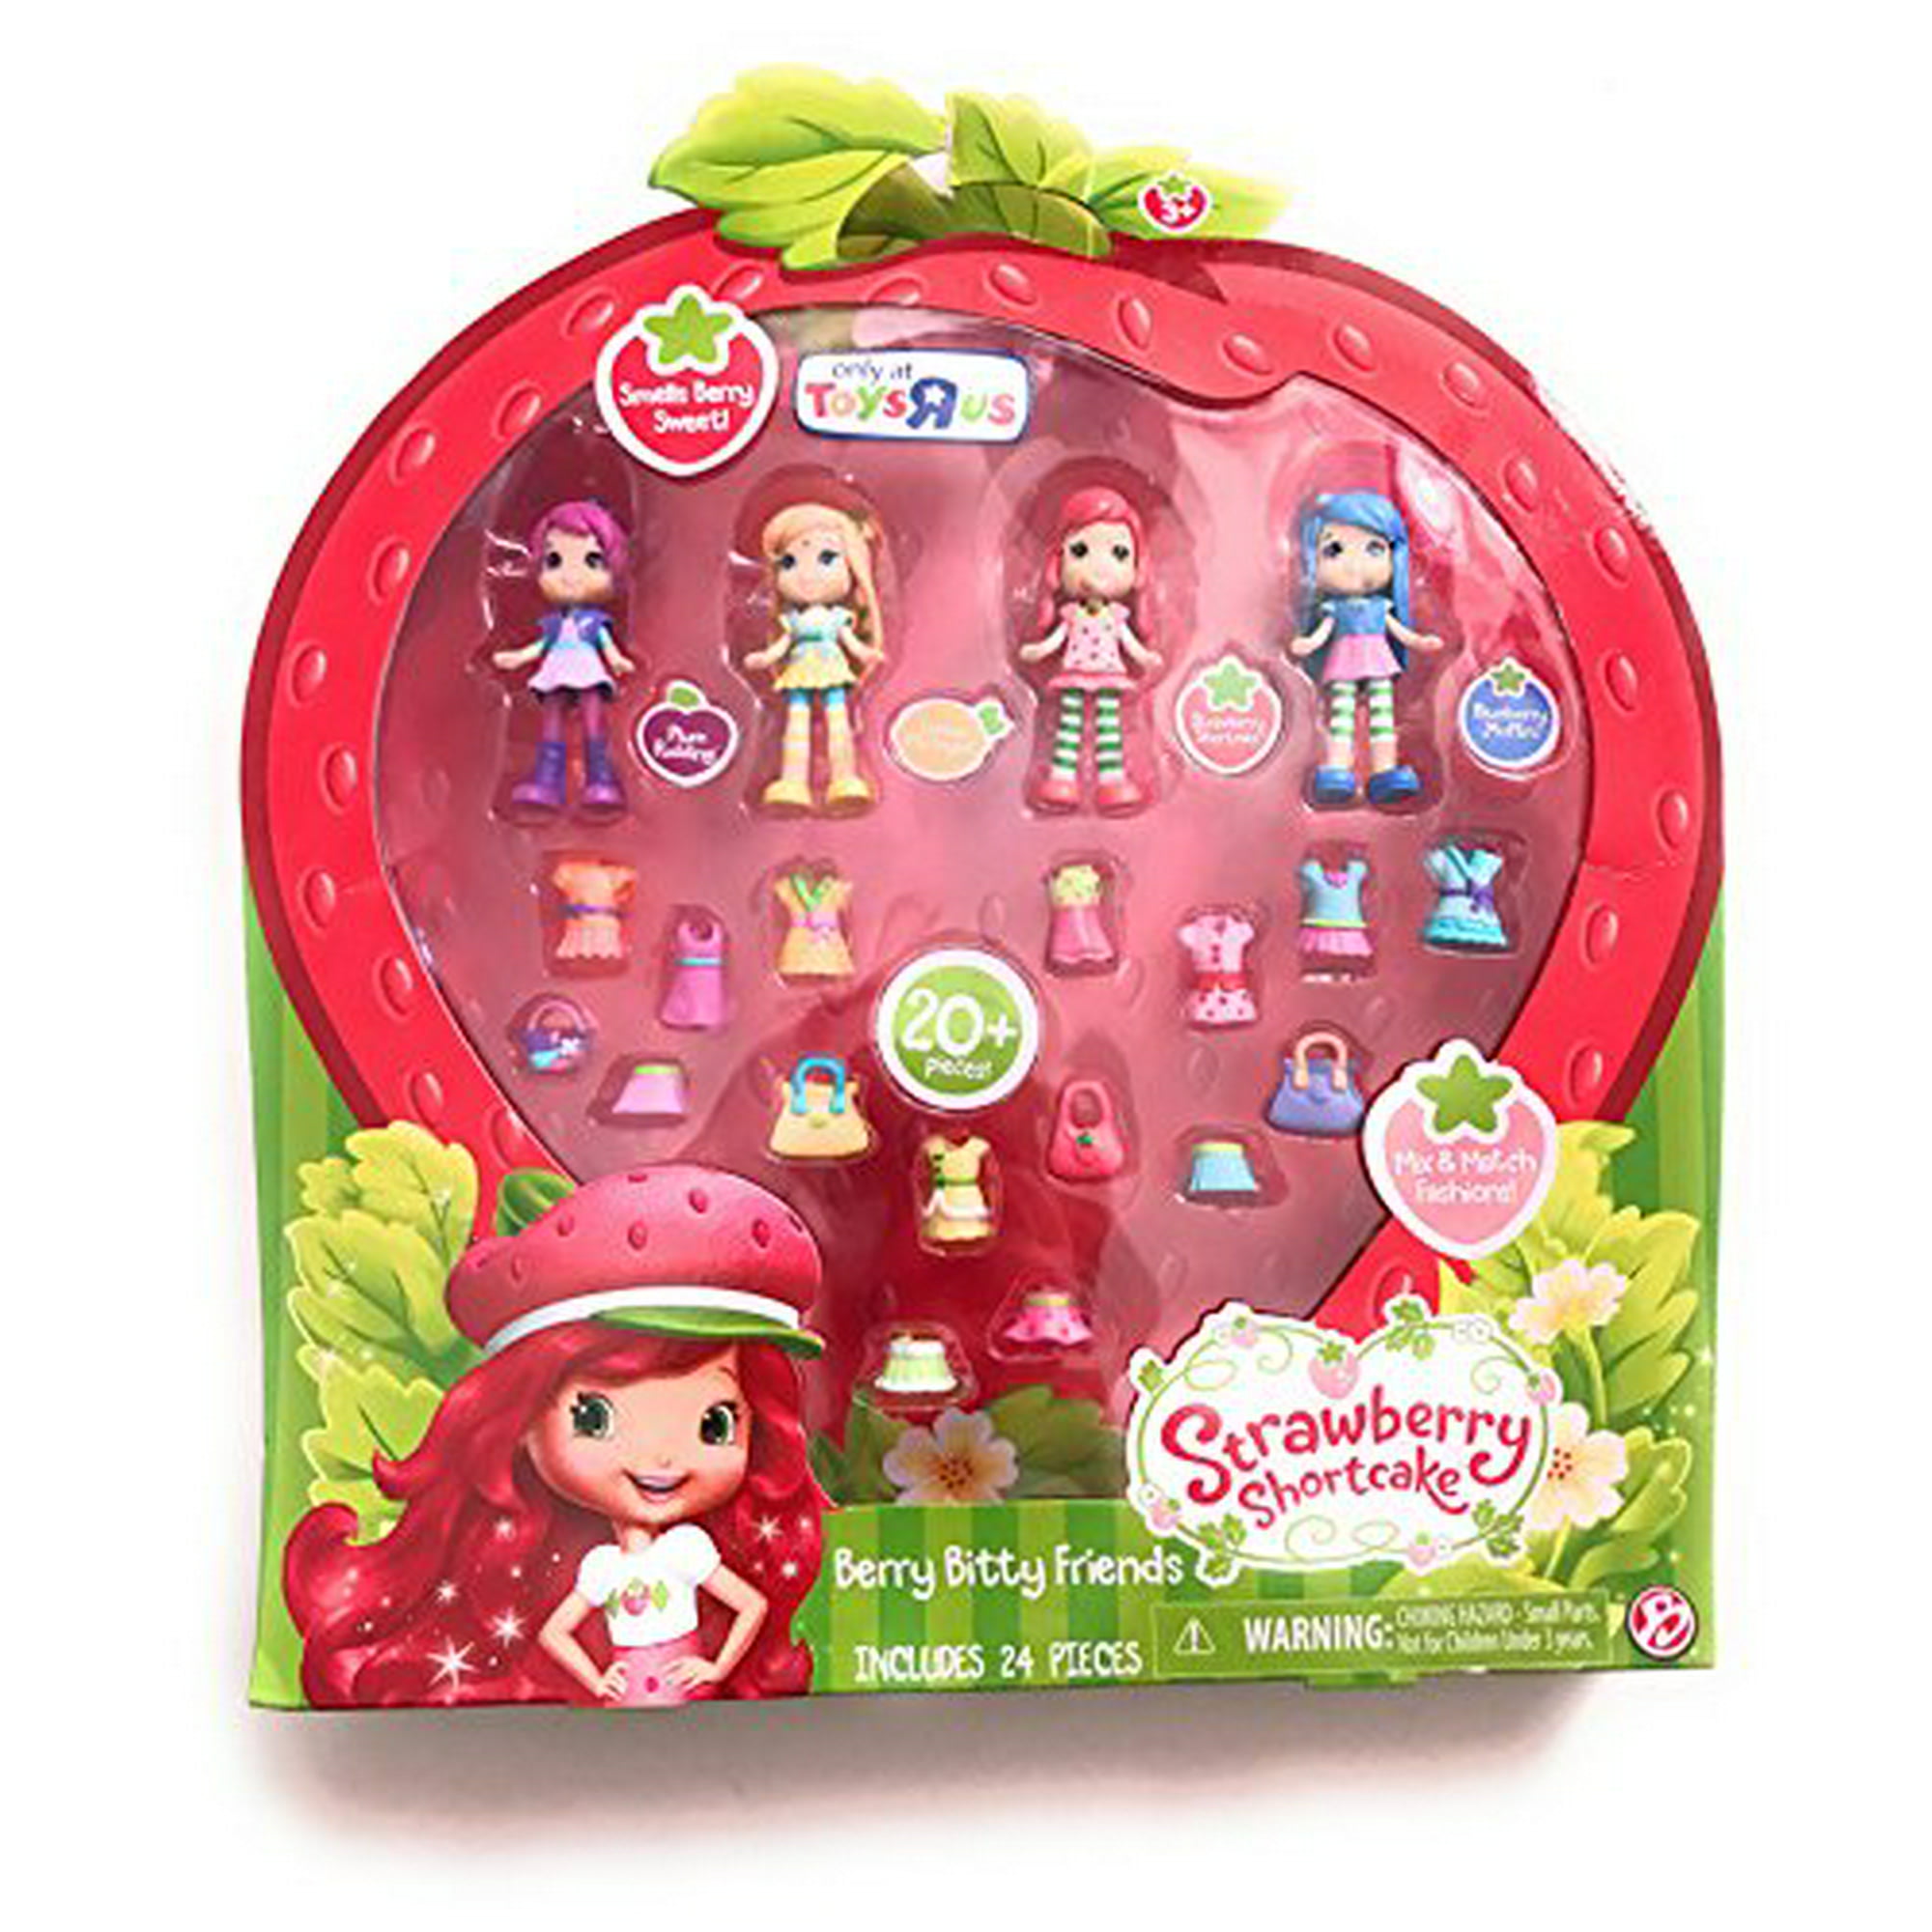 Strawberry Shortcake Plush TOY 3 Pack 7 INCHES BLUEBERRY MUFFIN PLUM PUDDING